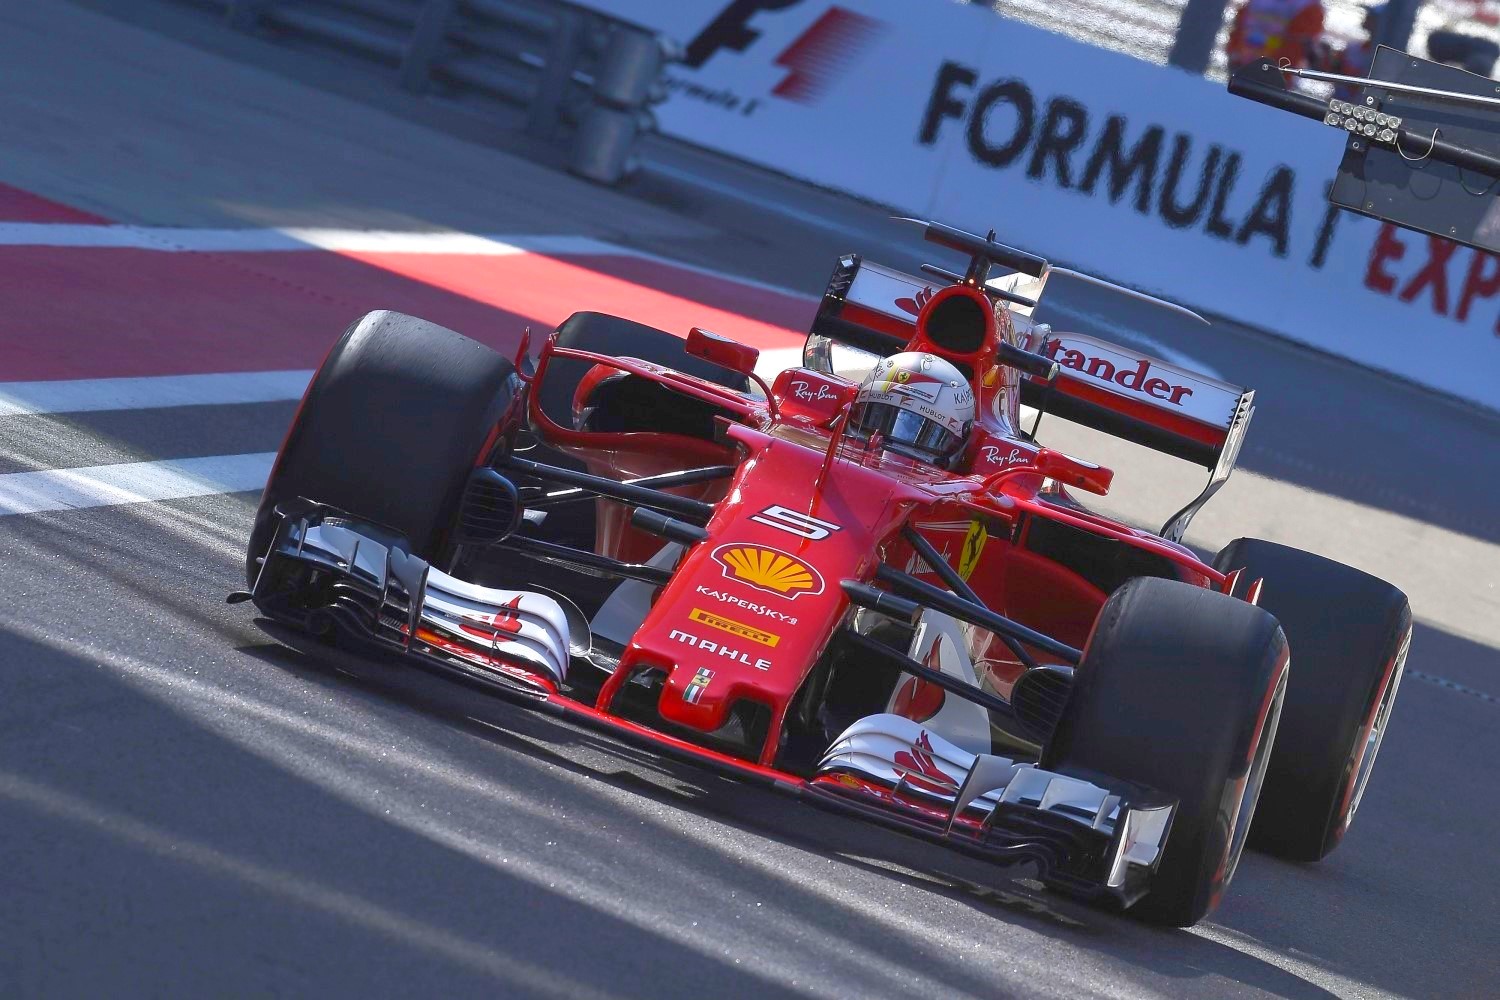 How far will Ferrari be behind at the finish this year?